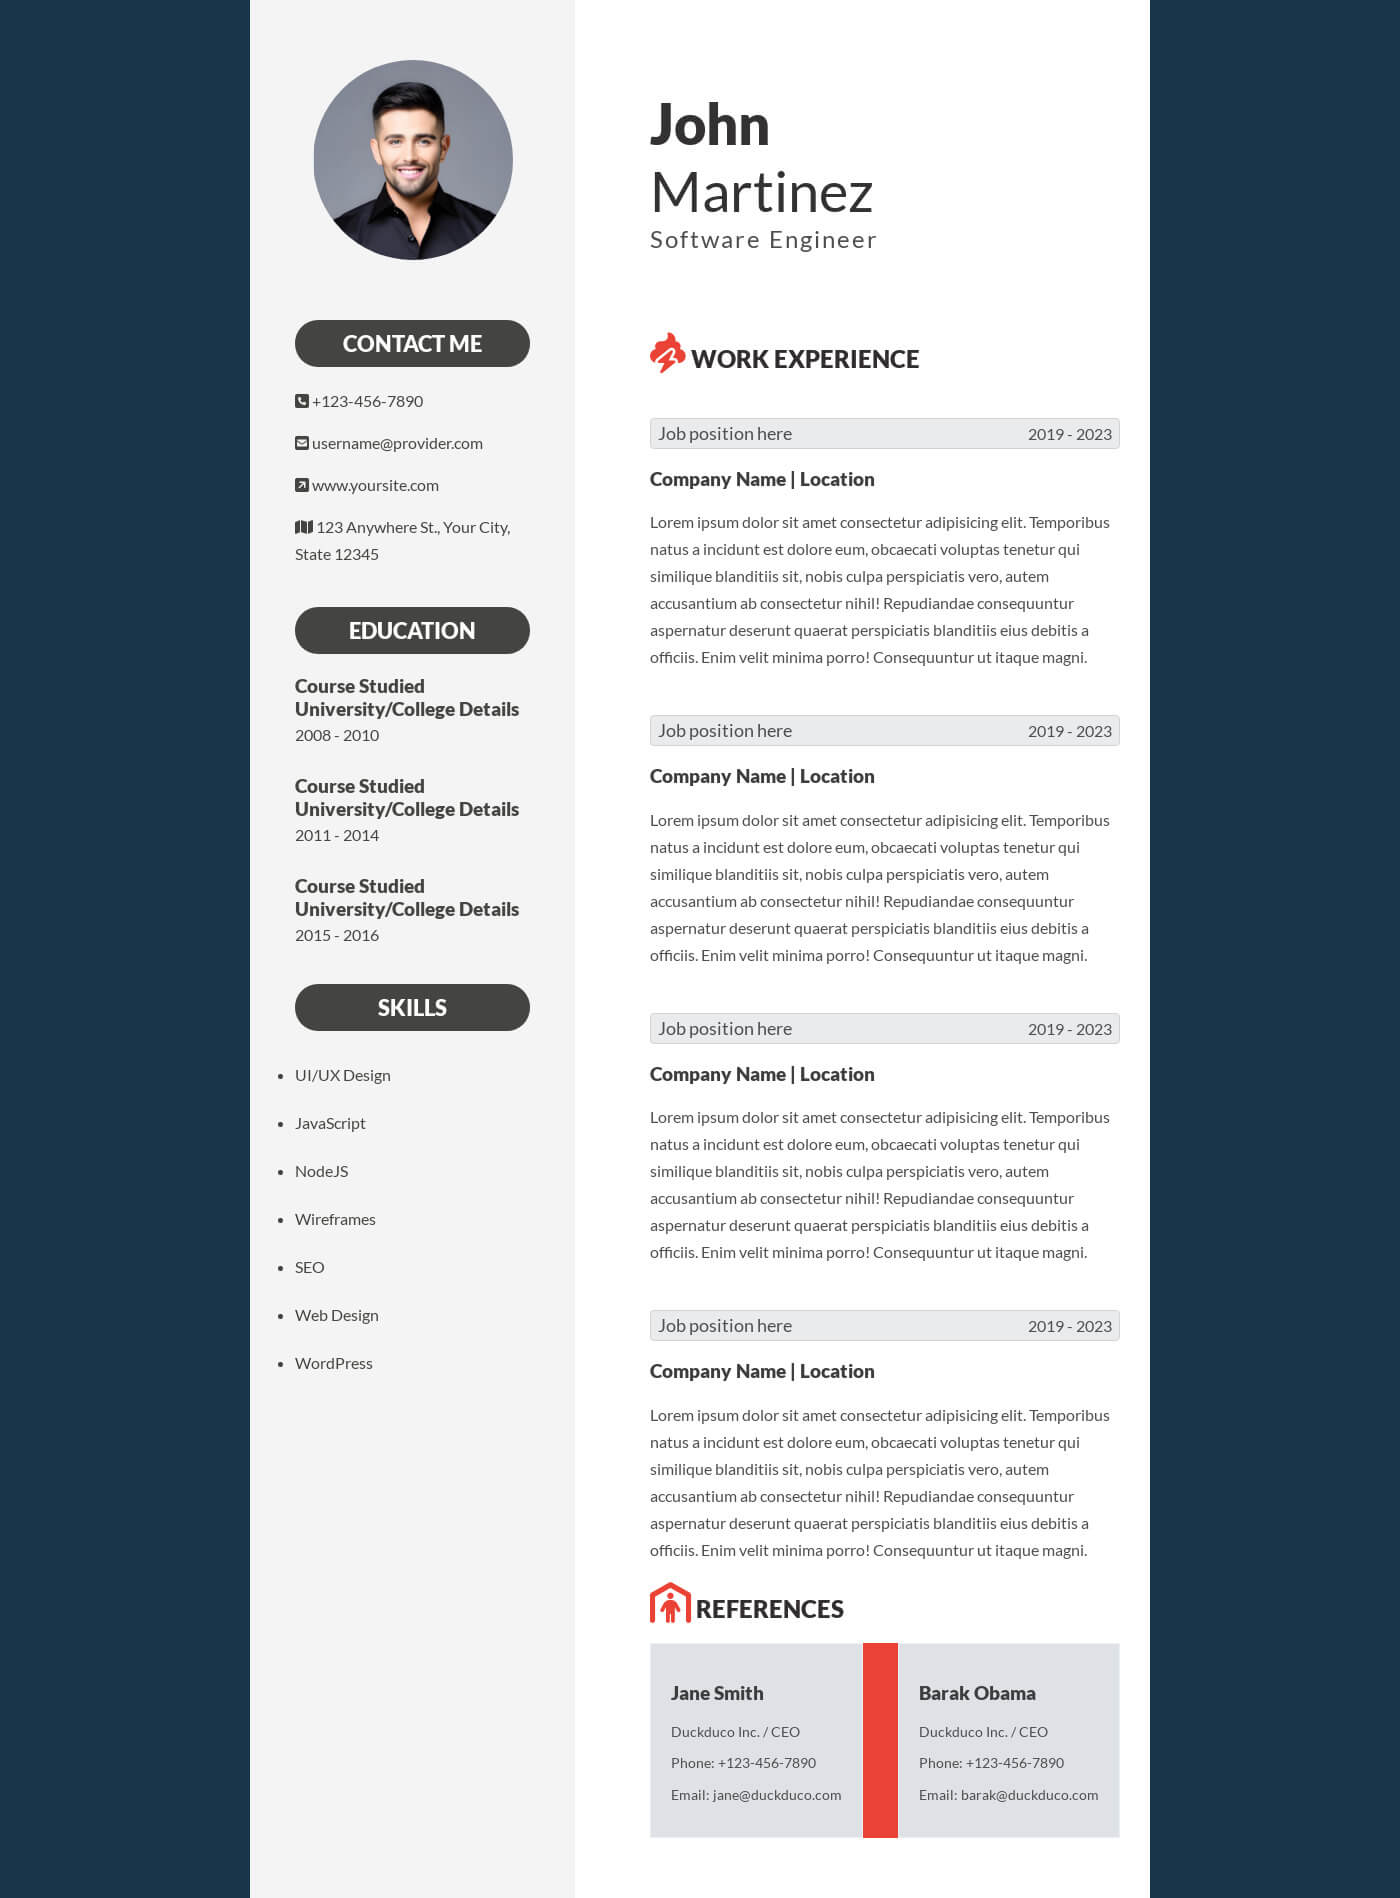 Online resume built with HTML & CSS and hosted on GitHub Pages